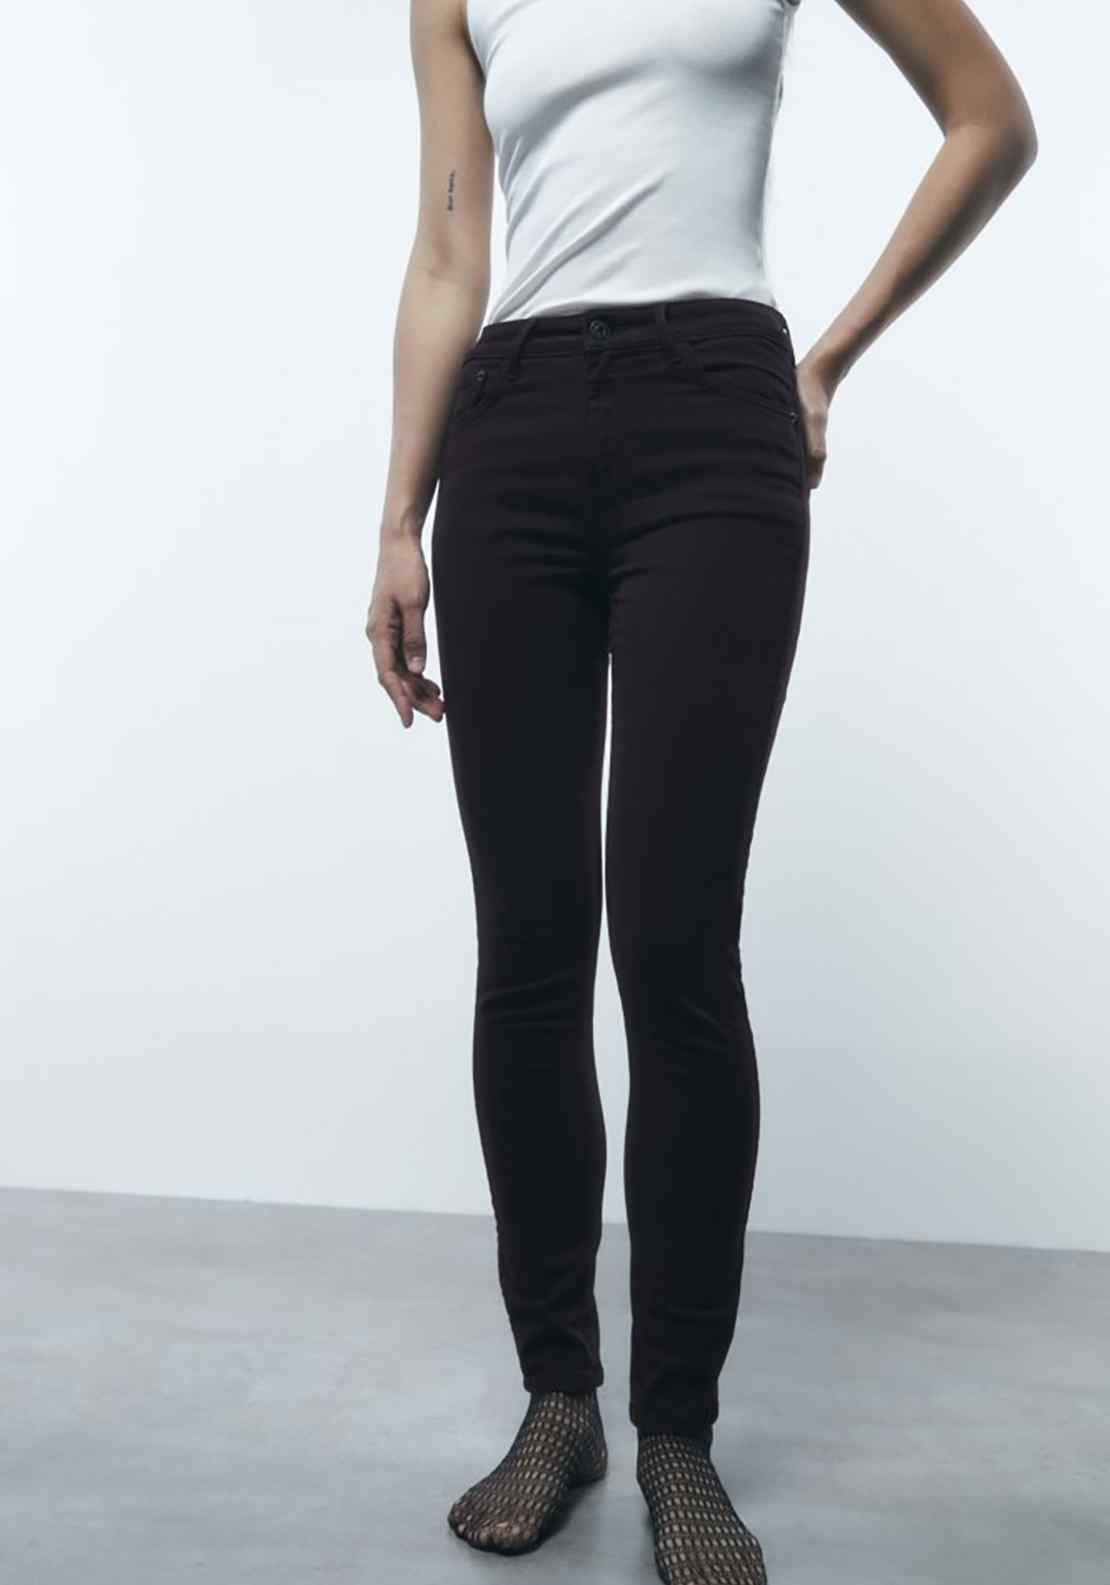 Sfera Skinny Jeans - Wine 1 Shaws Department Stores